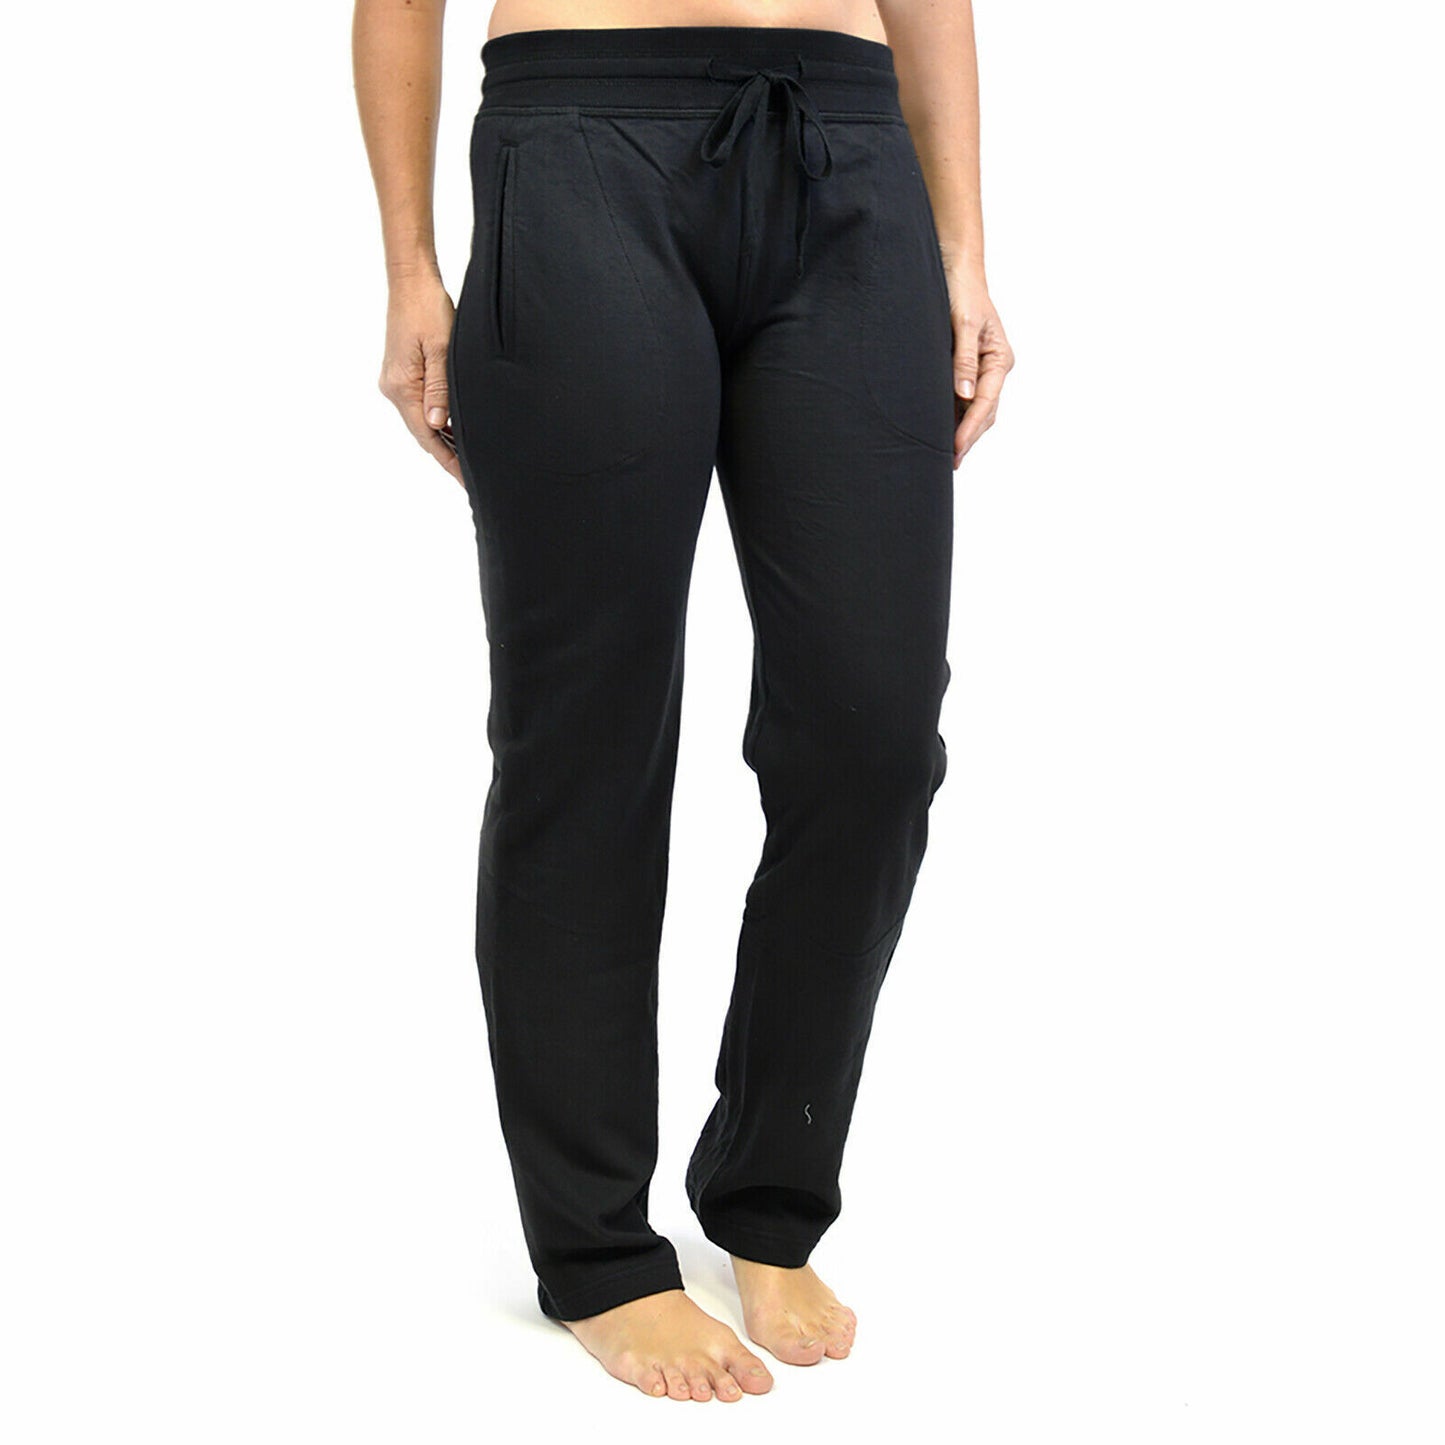 LADIES WOMENS JOG PANTS YOGA CASUAL GYM JOGGERS JOGGING BOTTOMS RUNNING TROUSERS